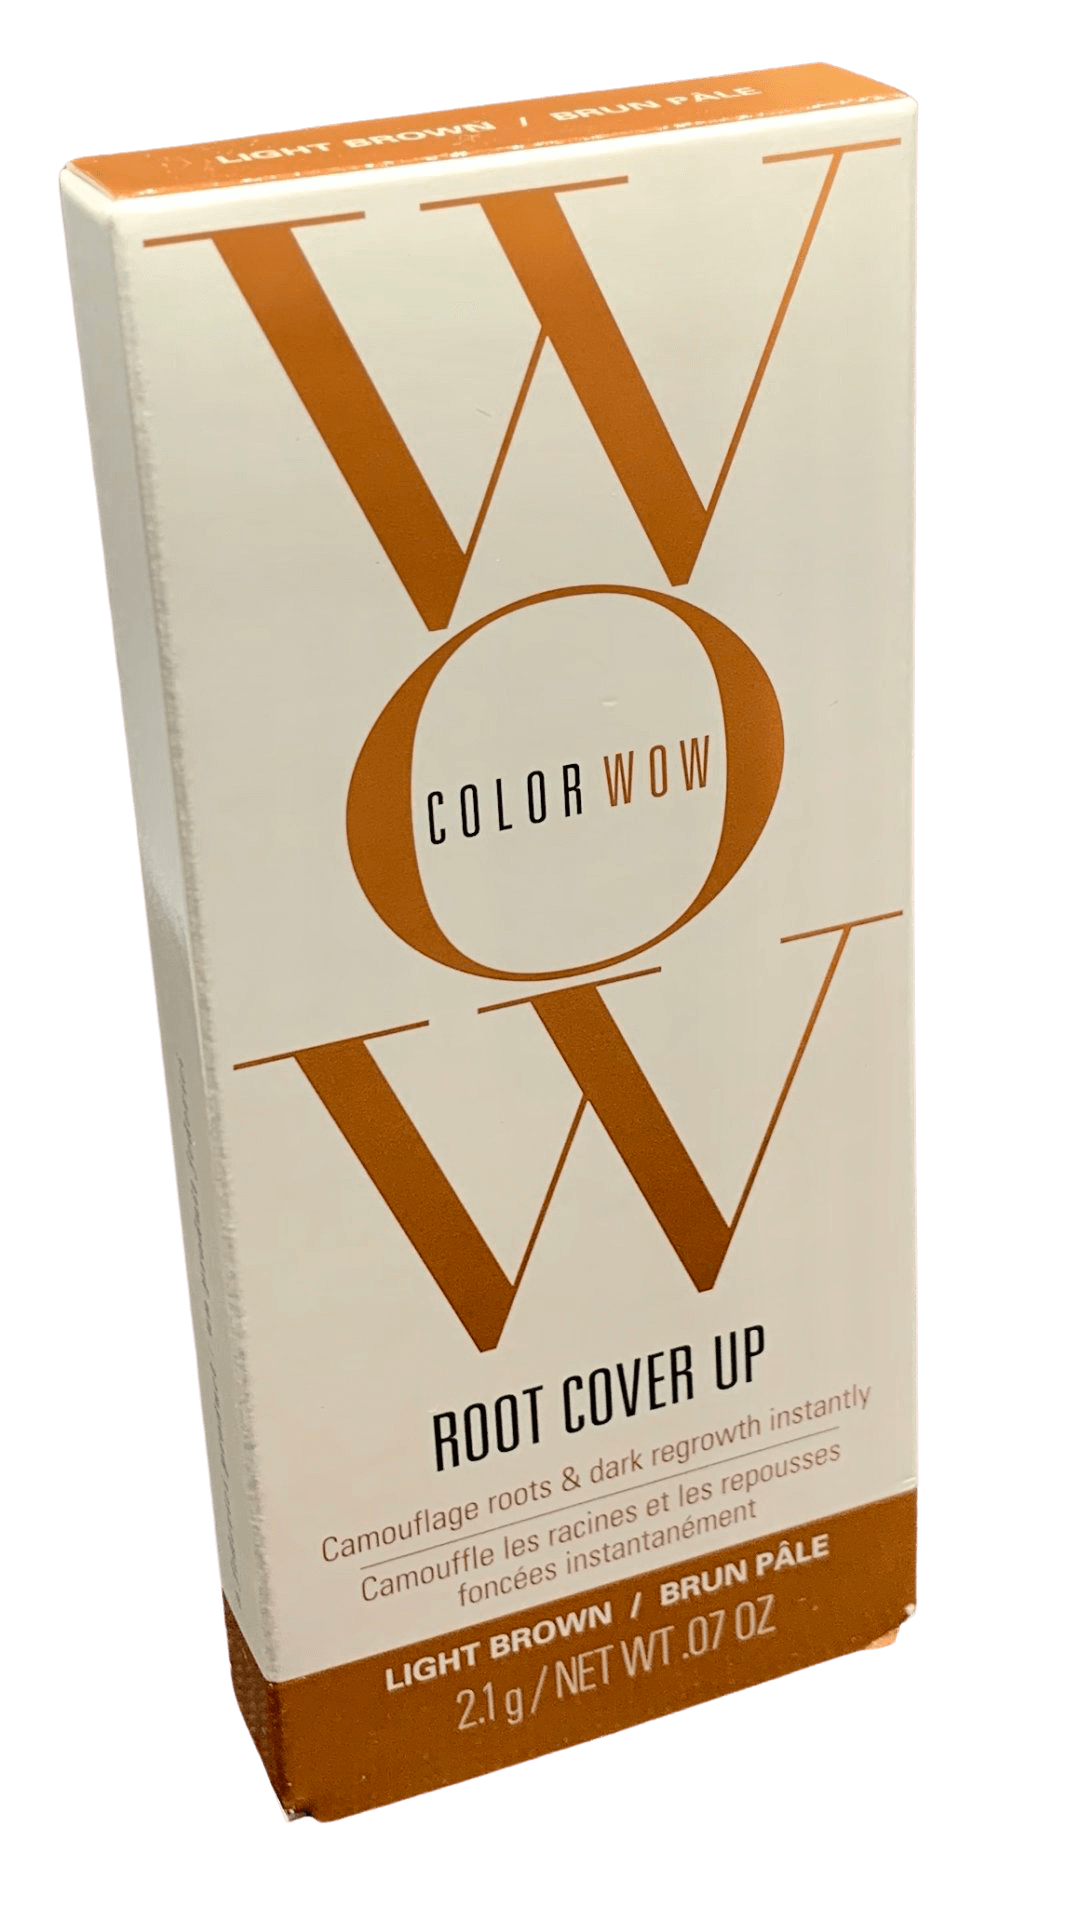 ColorWow Root Cover Up Light Brown 2.1g